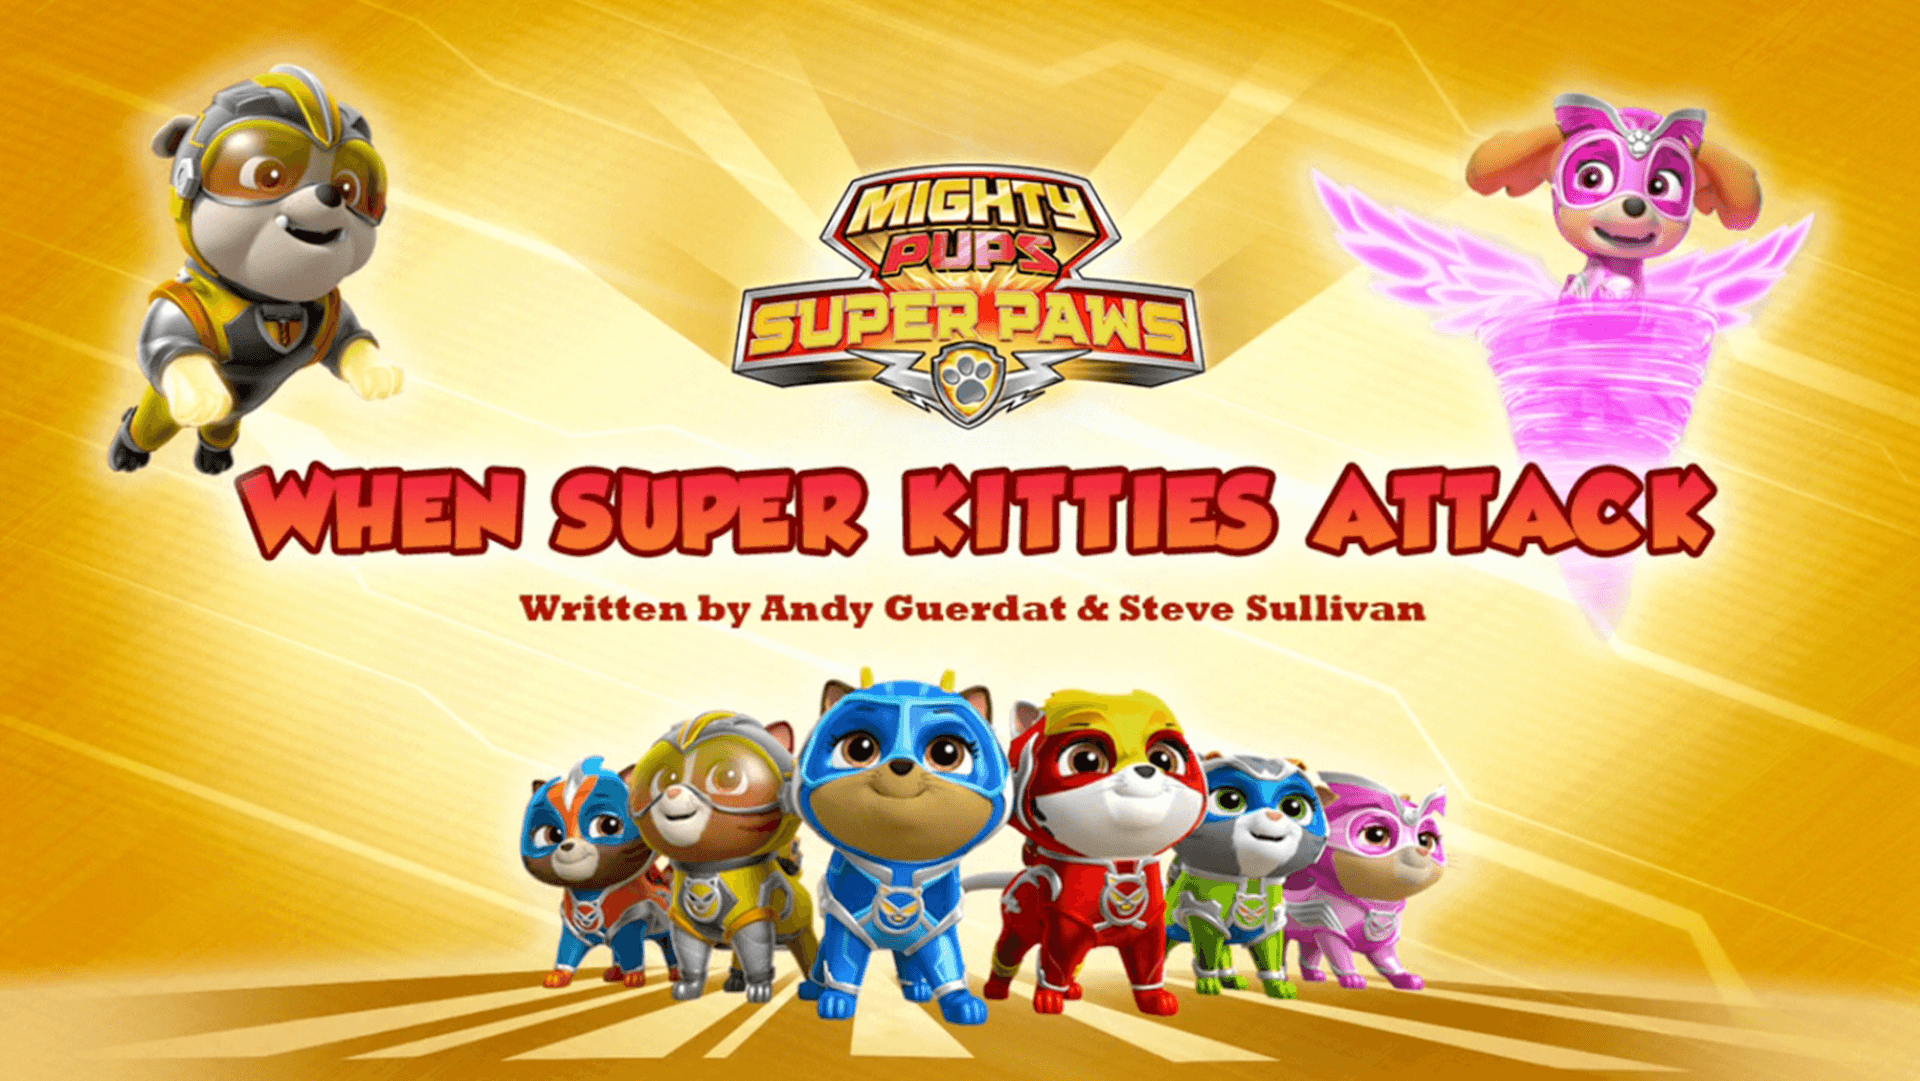 Mighty Pups, Super Paws: When Super Kitties Attack. PAW